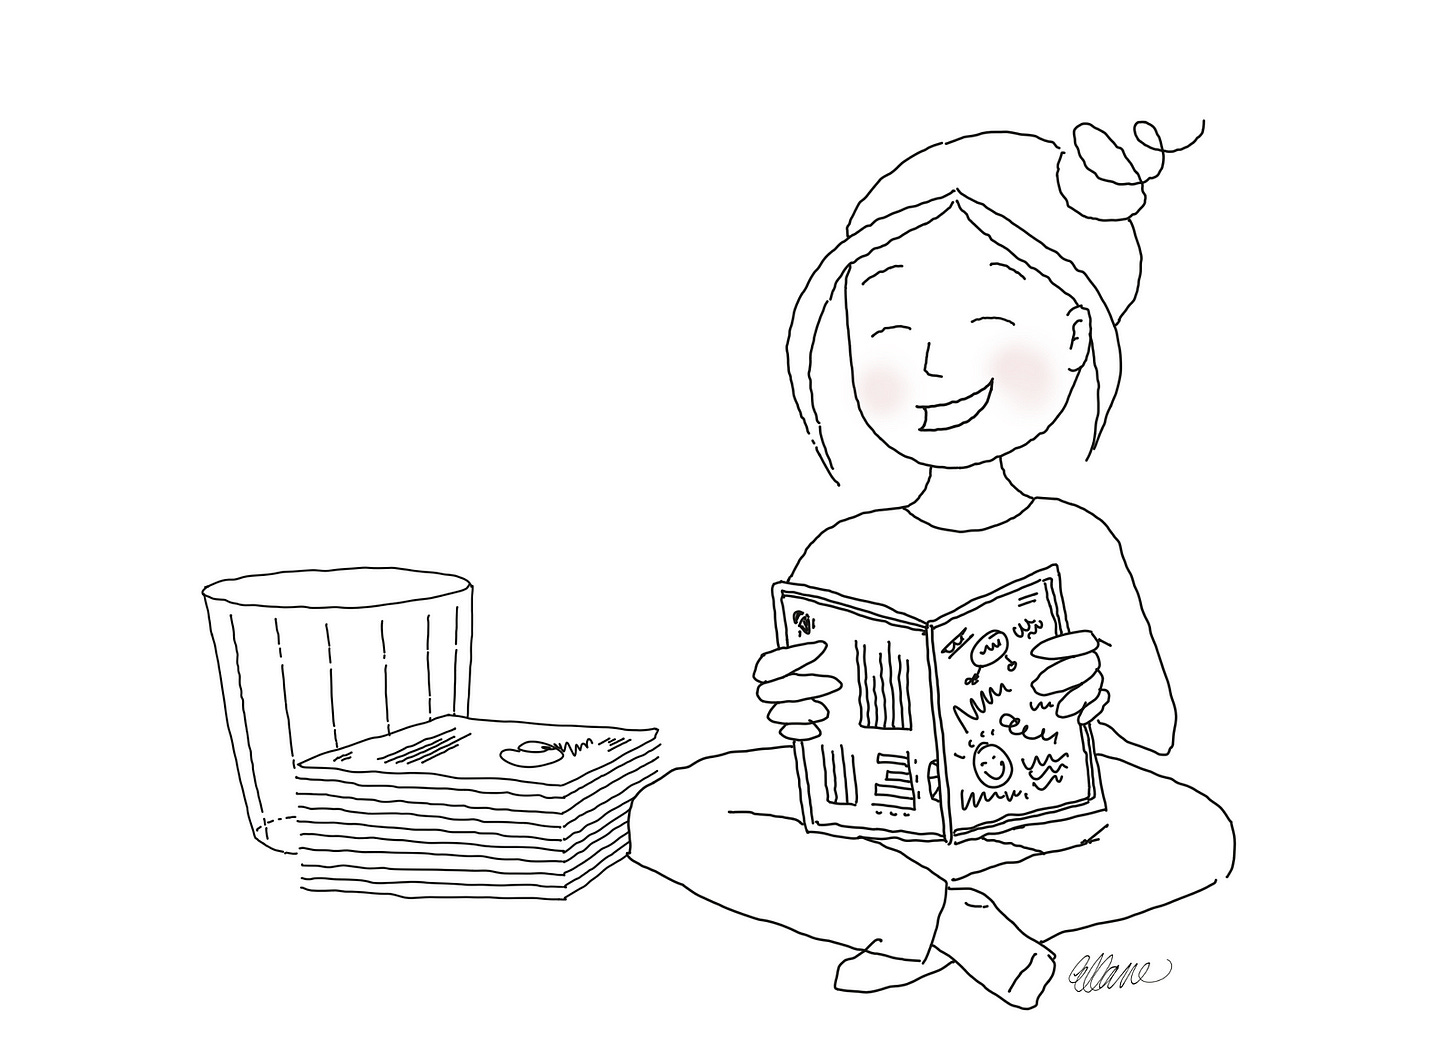 Cartoon lineart showing a person sitting crosslegged on the floor, holding out an open notebook with writing inside it. Next to them is a stack of printed paper, and an empty wastepaper bin.